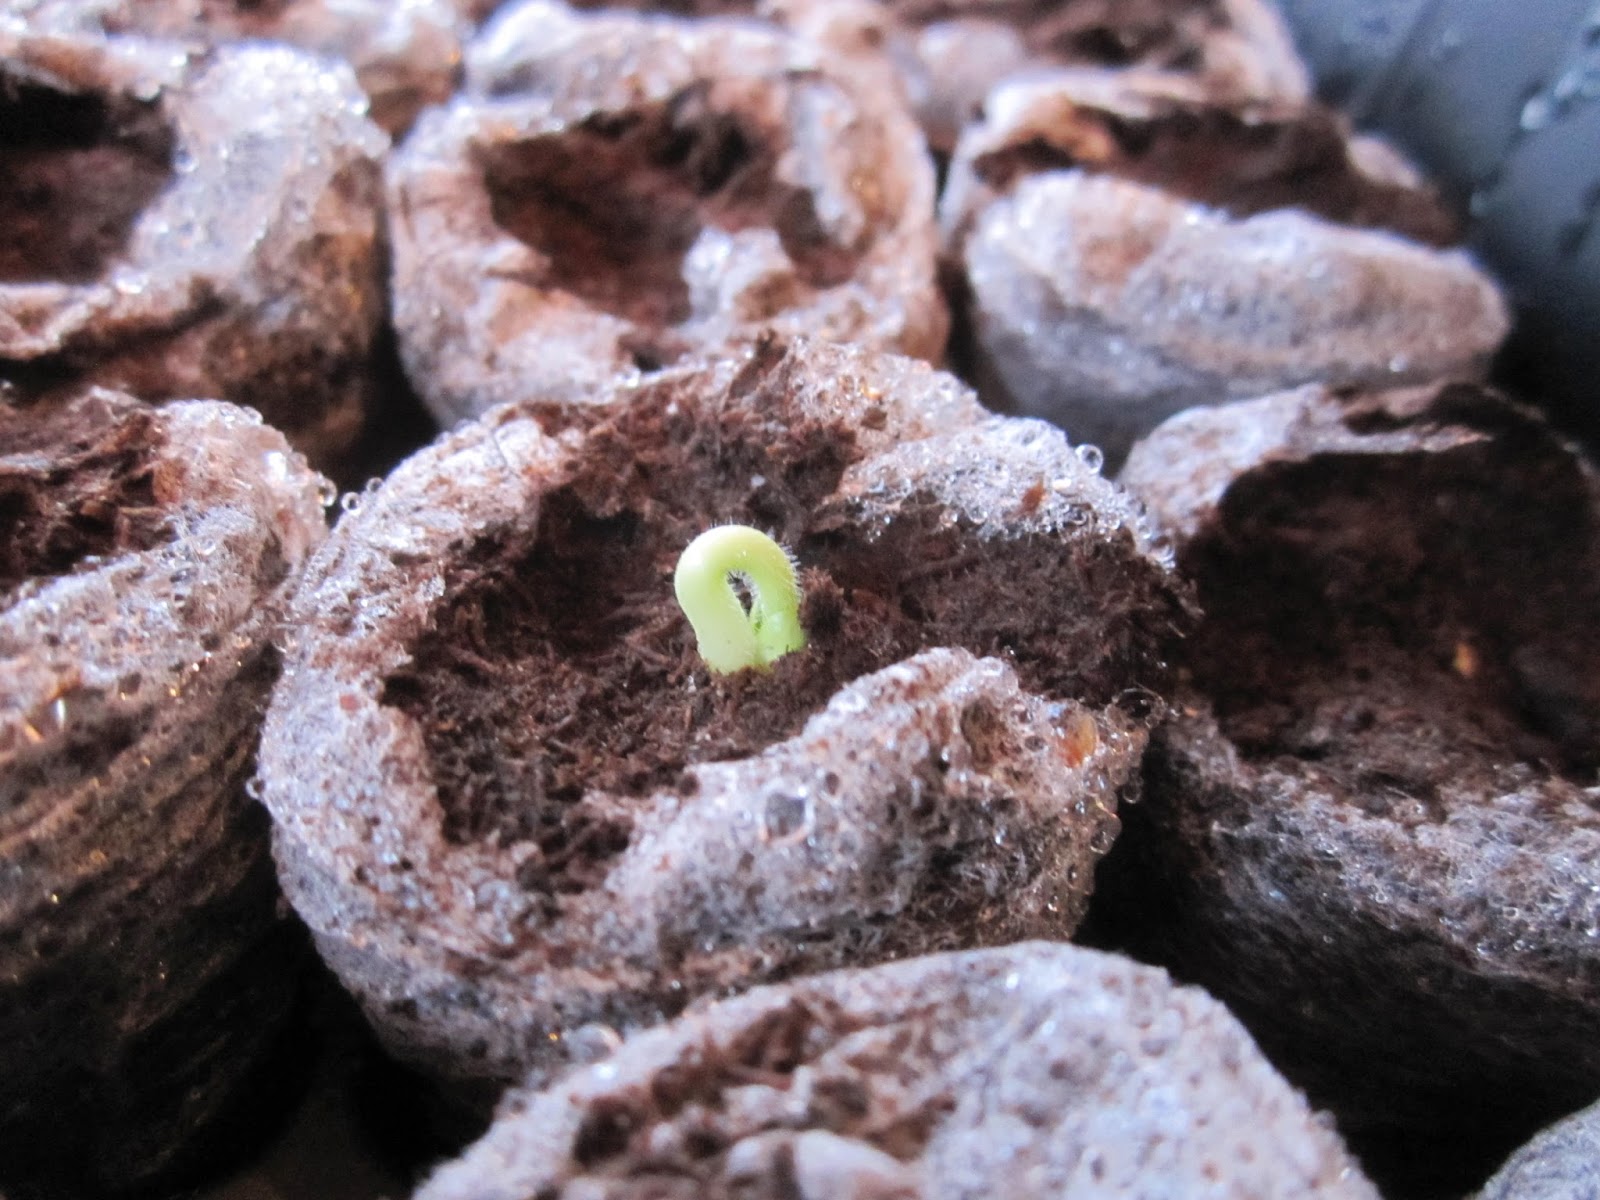 Cold Hands Warm Earth: Okra Seeds - only 2 days to germinate!